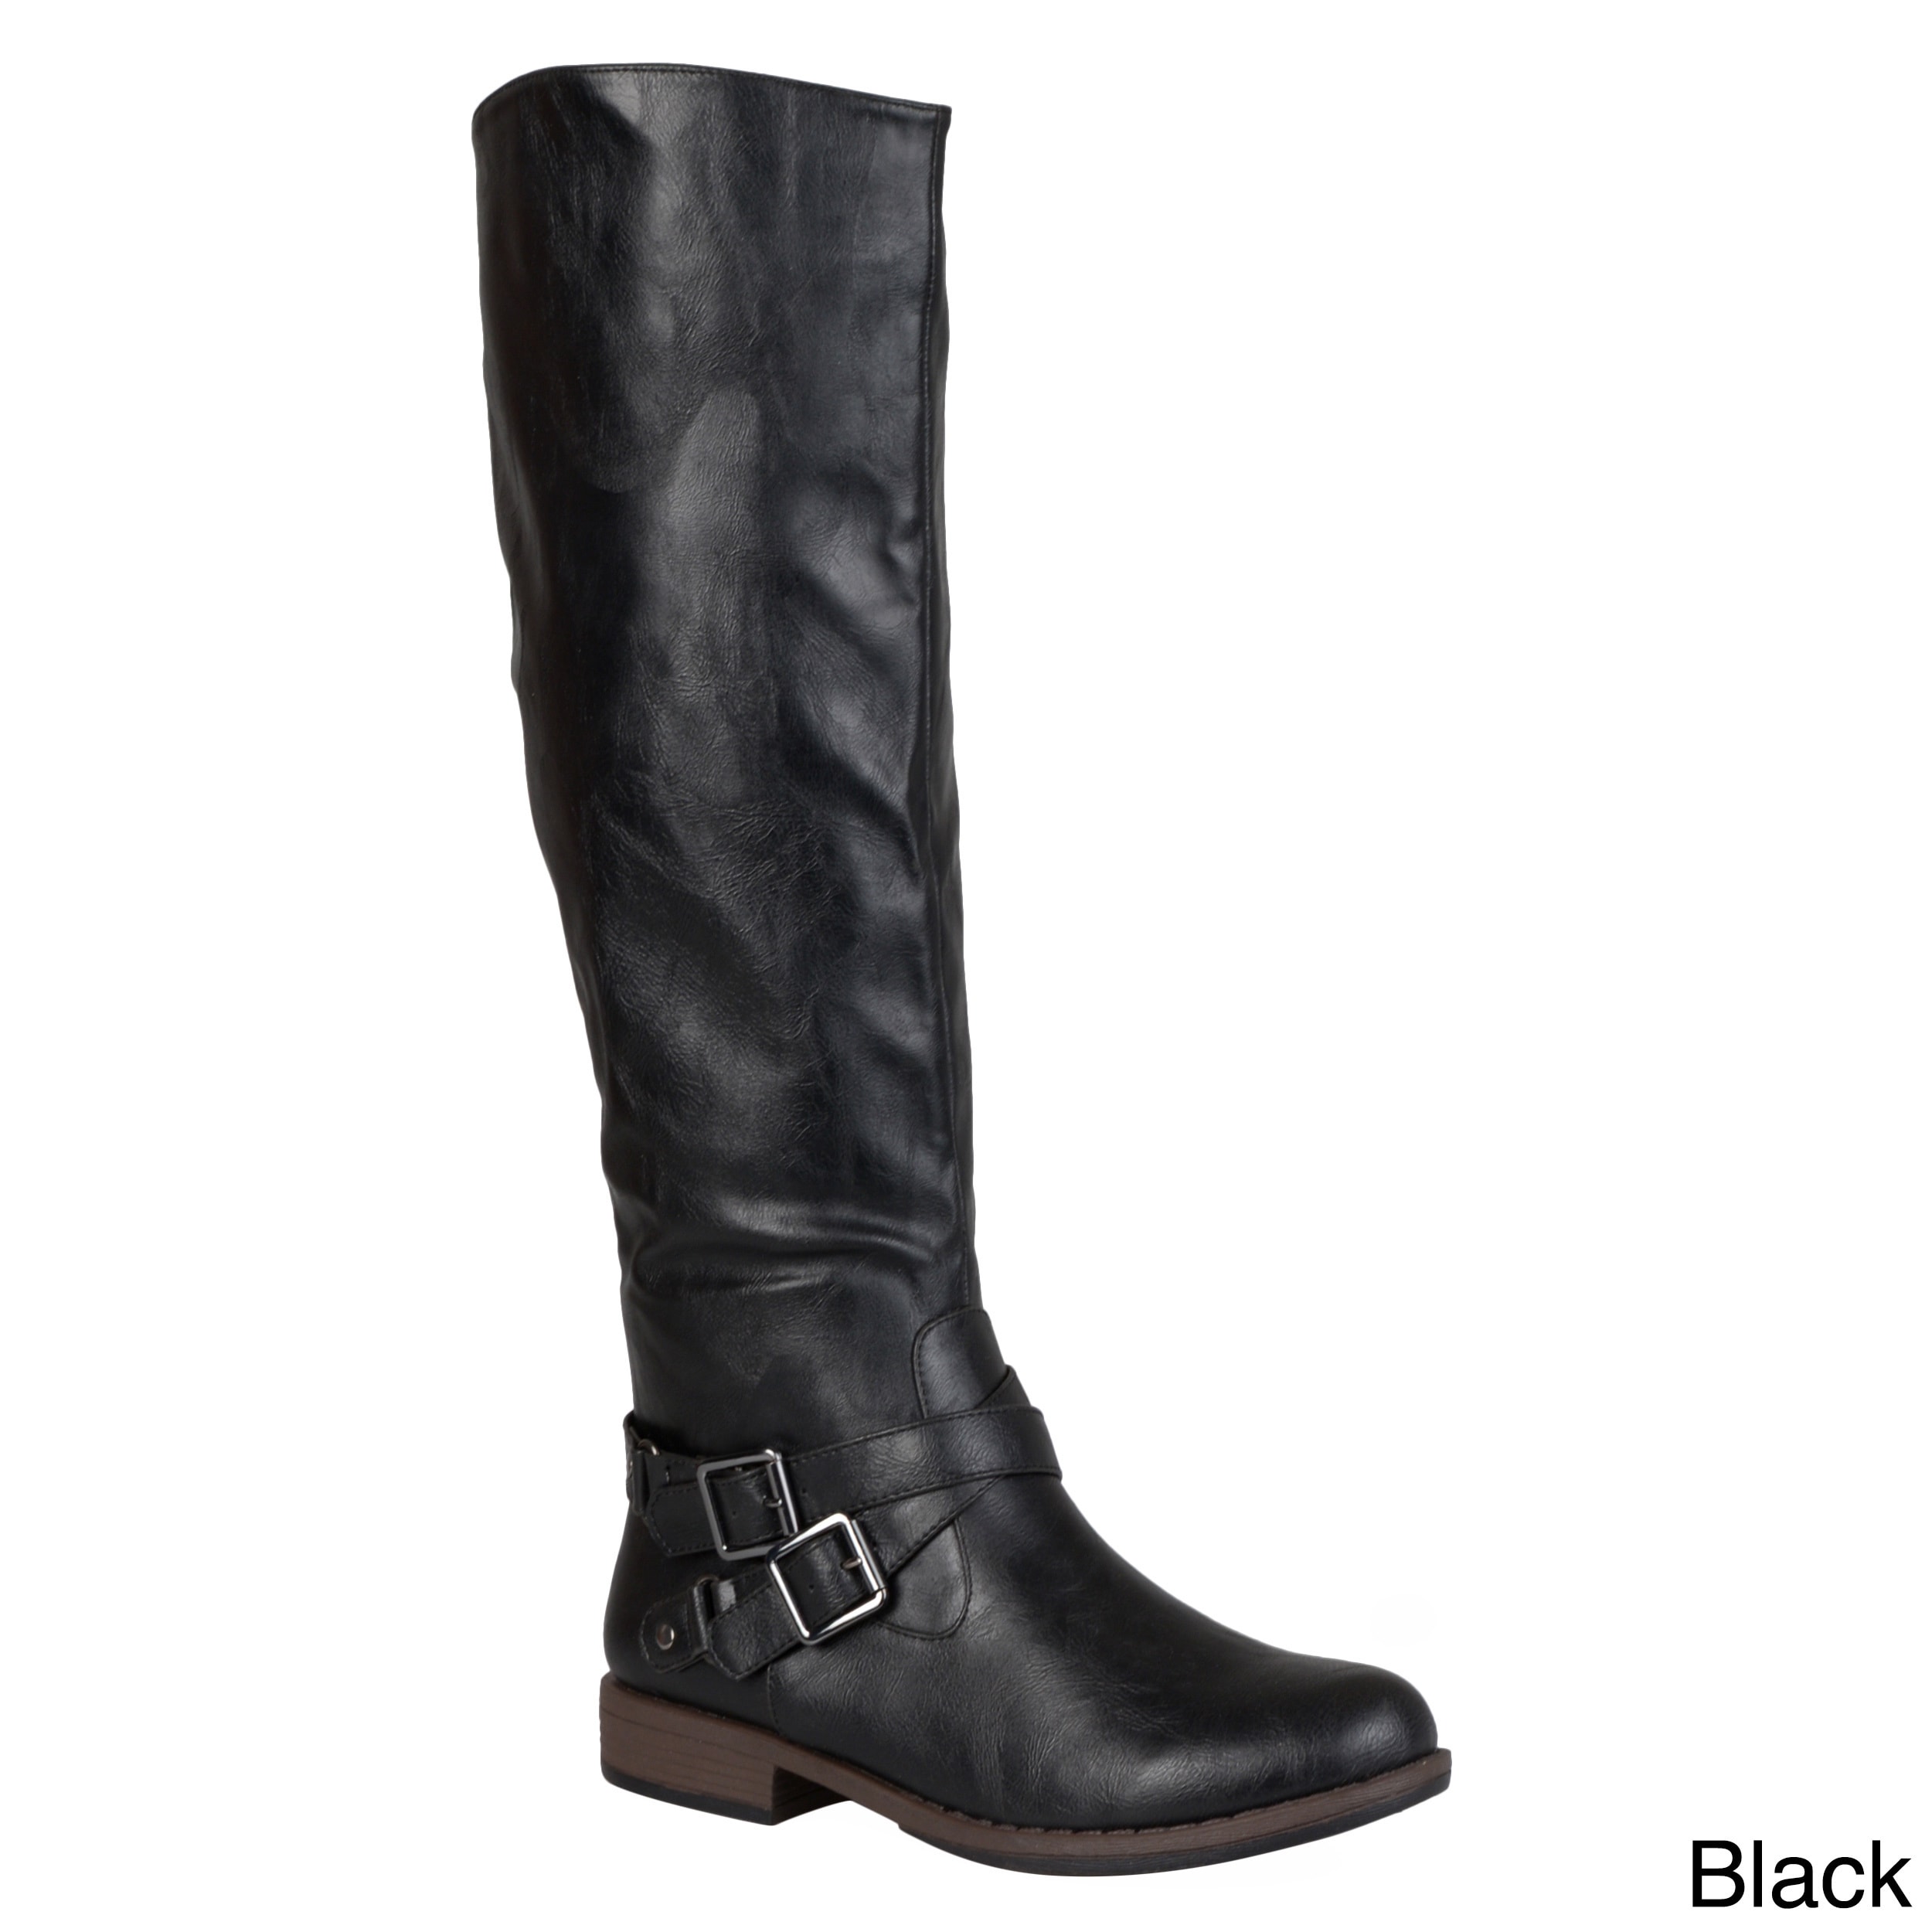 riding boots for women black